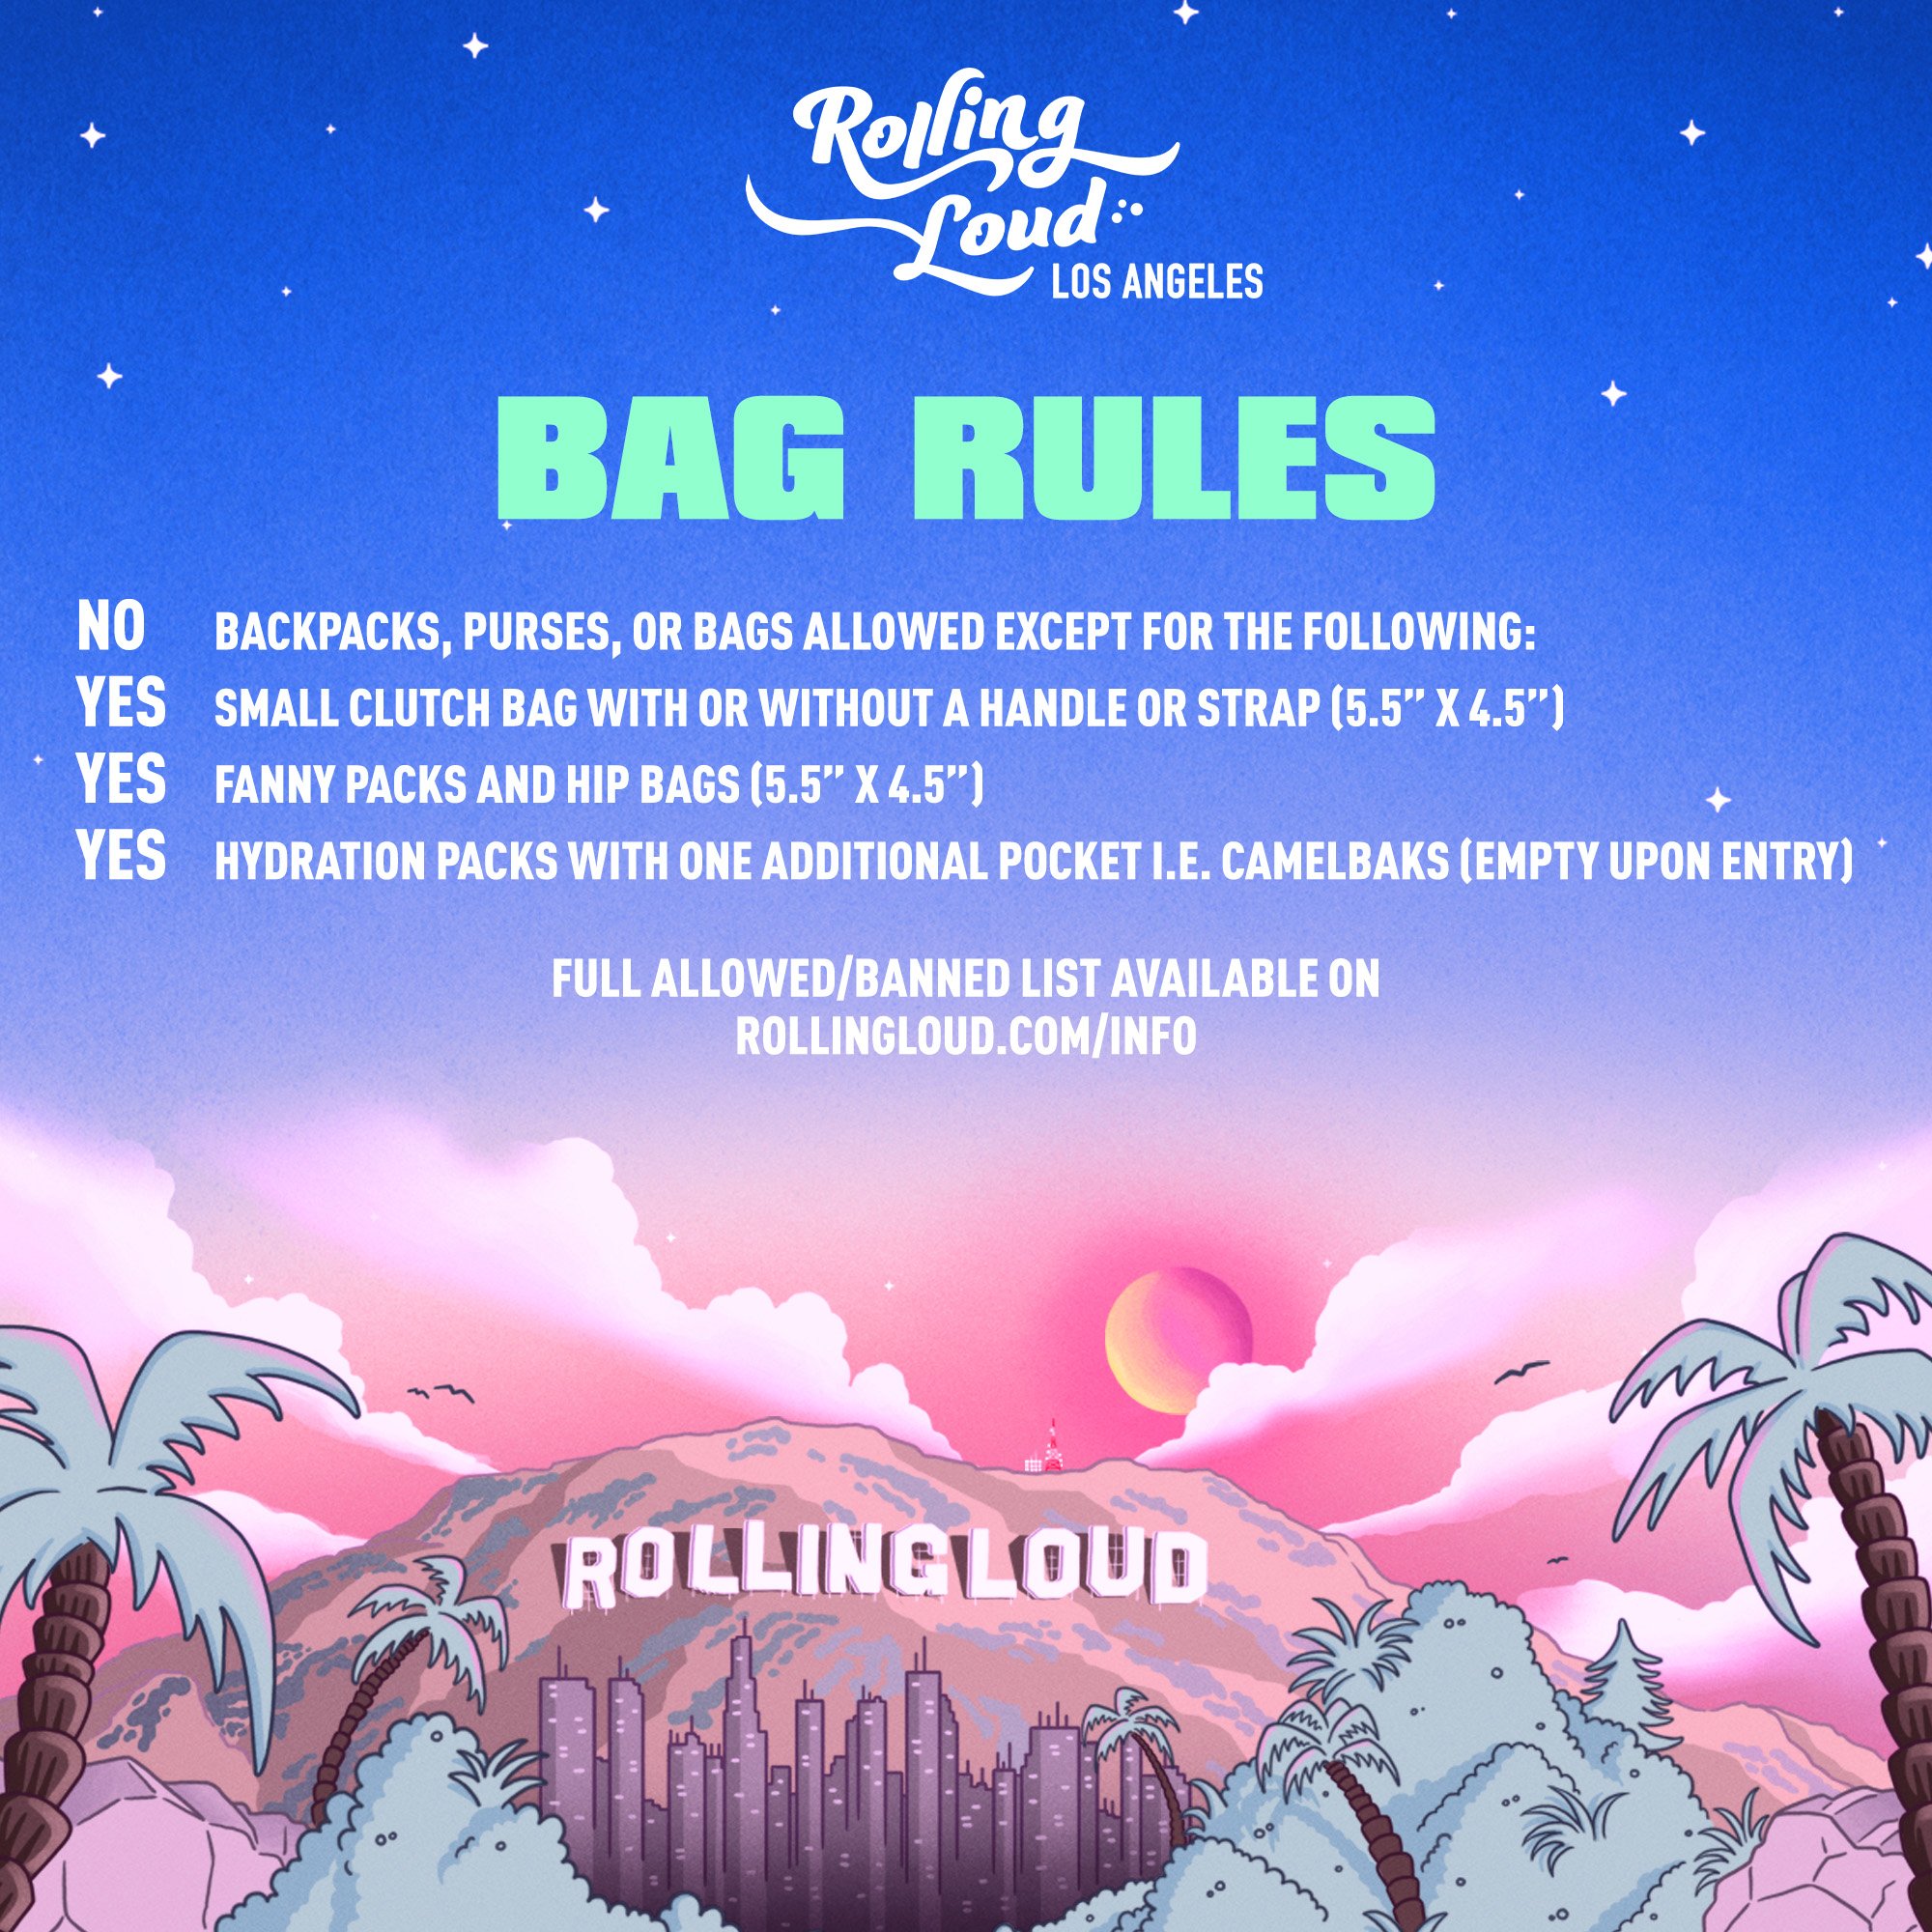 rolling loud - ARRIVE IN STYLE. @flyblade TO THE #LOUDCLUB NEXT